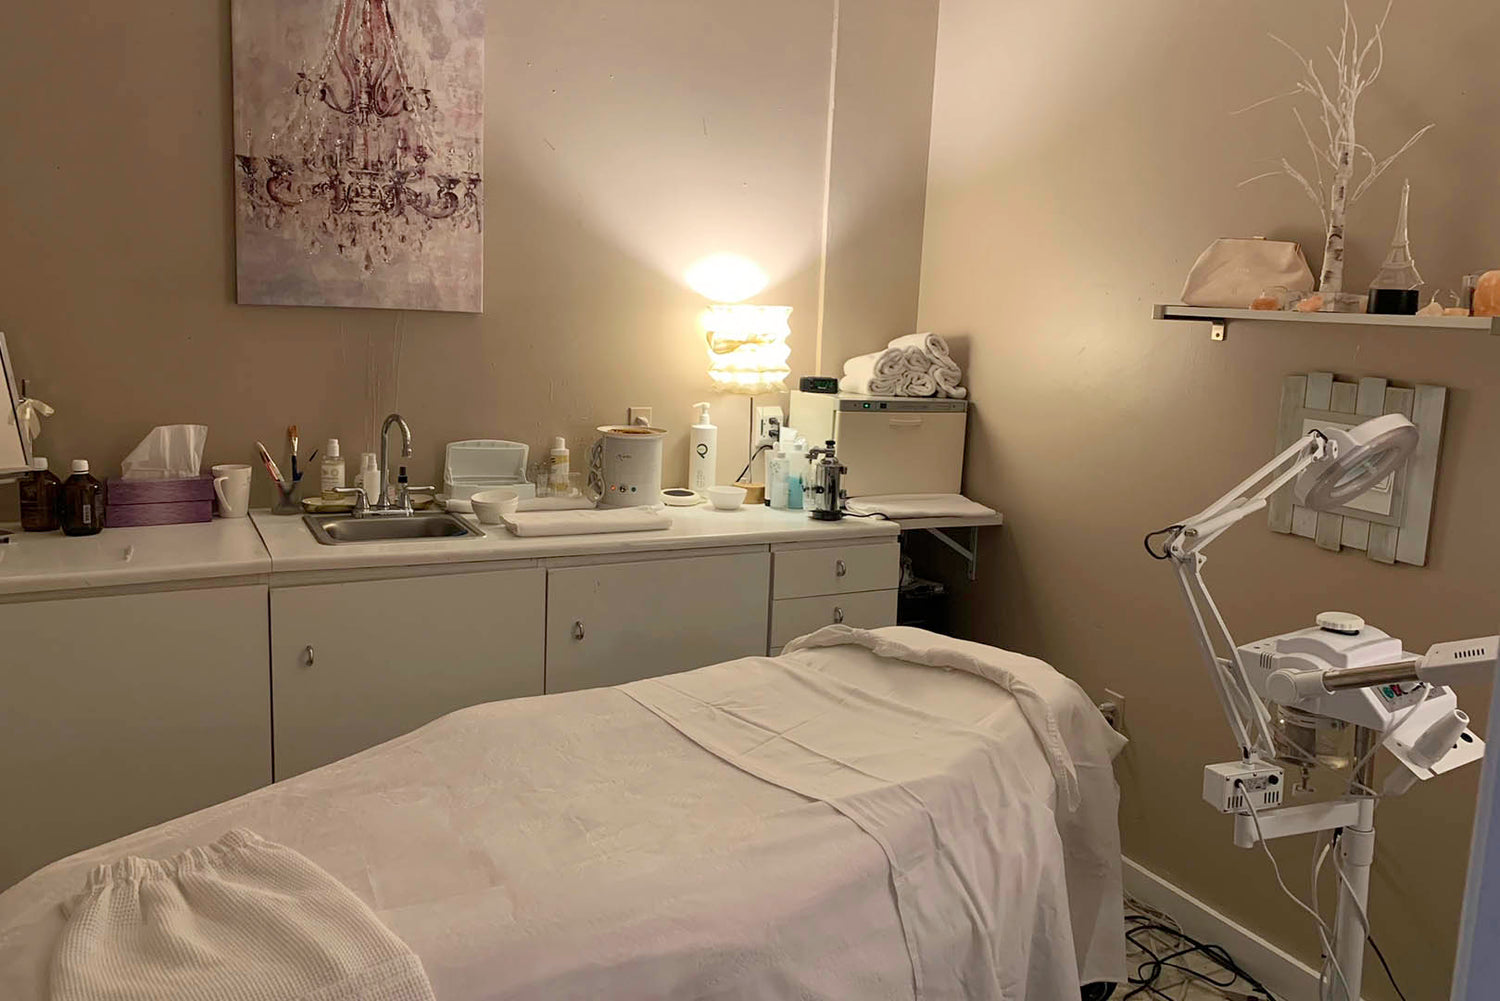 Spa of the Month: Face Works Day Spa